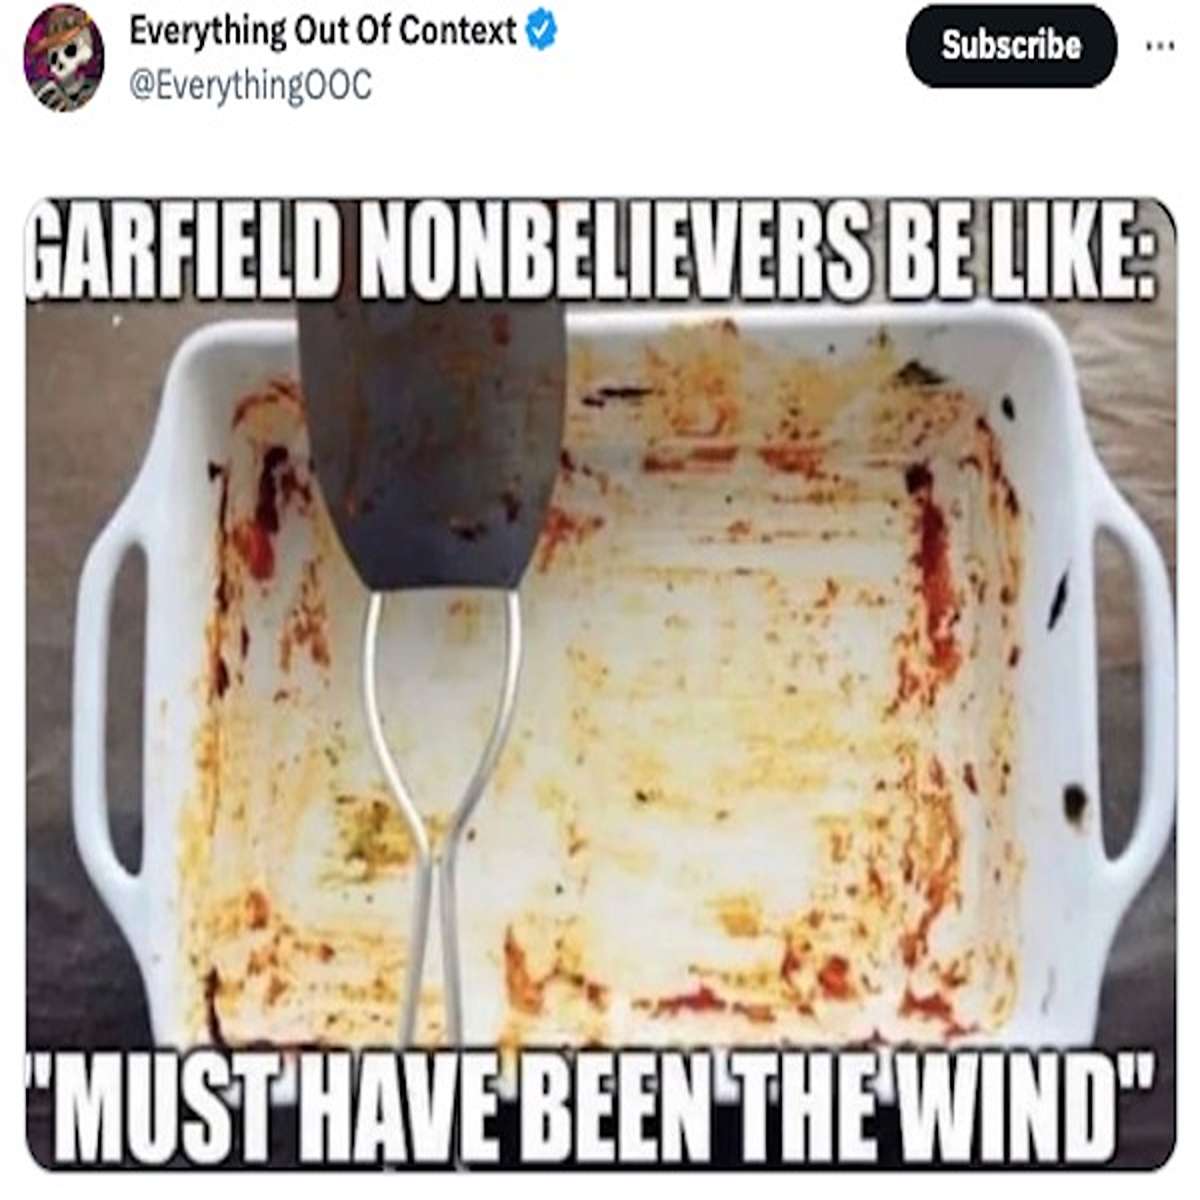 funny tweets and memes - food - Everything Out Of Context Garfield Nonbelievers Be Subscribe 'Must Have Been The Wind"